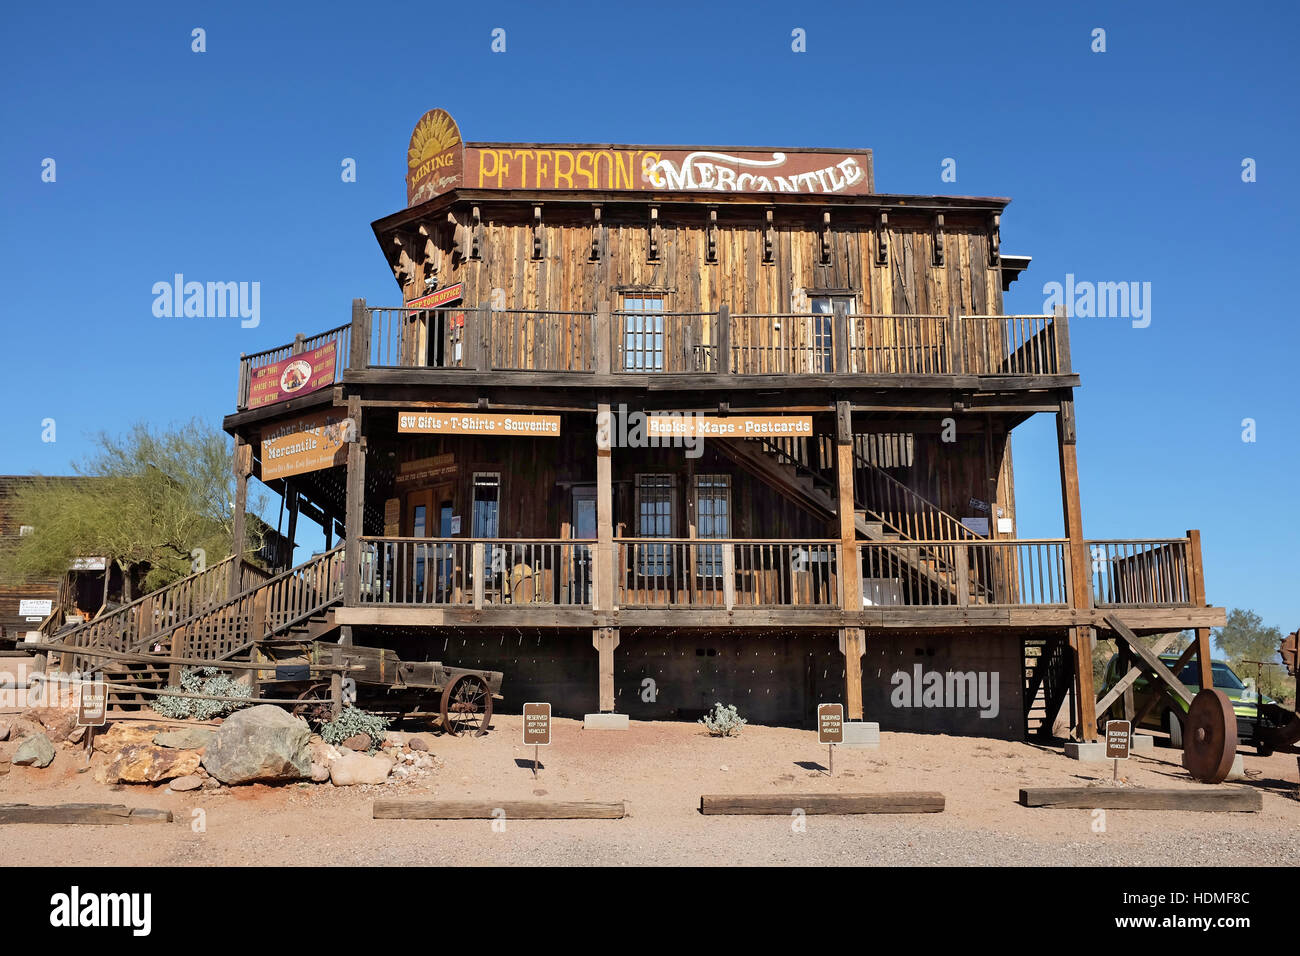 Peterson's Mercantile at the Goldfield Ghost Town, in Apache Junction, Arizona, off of Route 88. Stock Photo